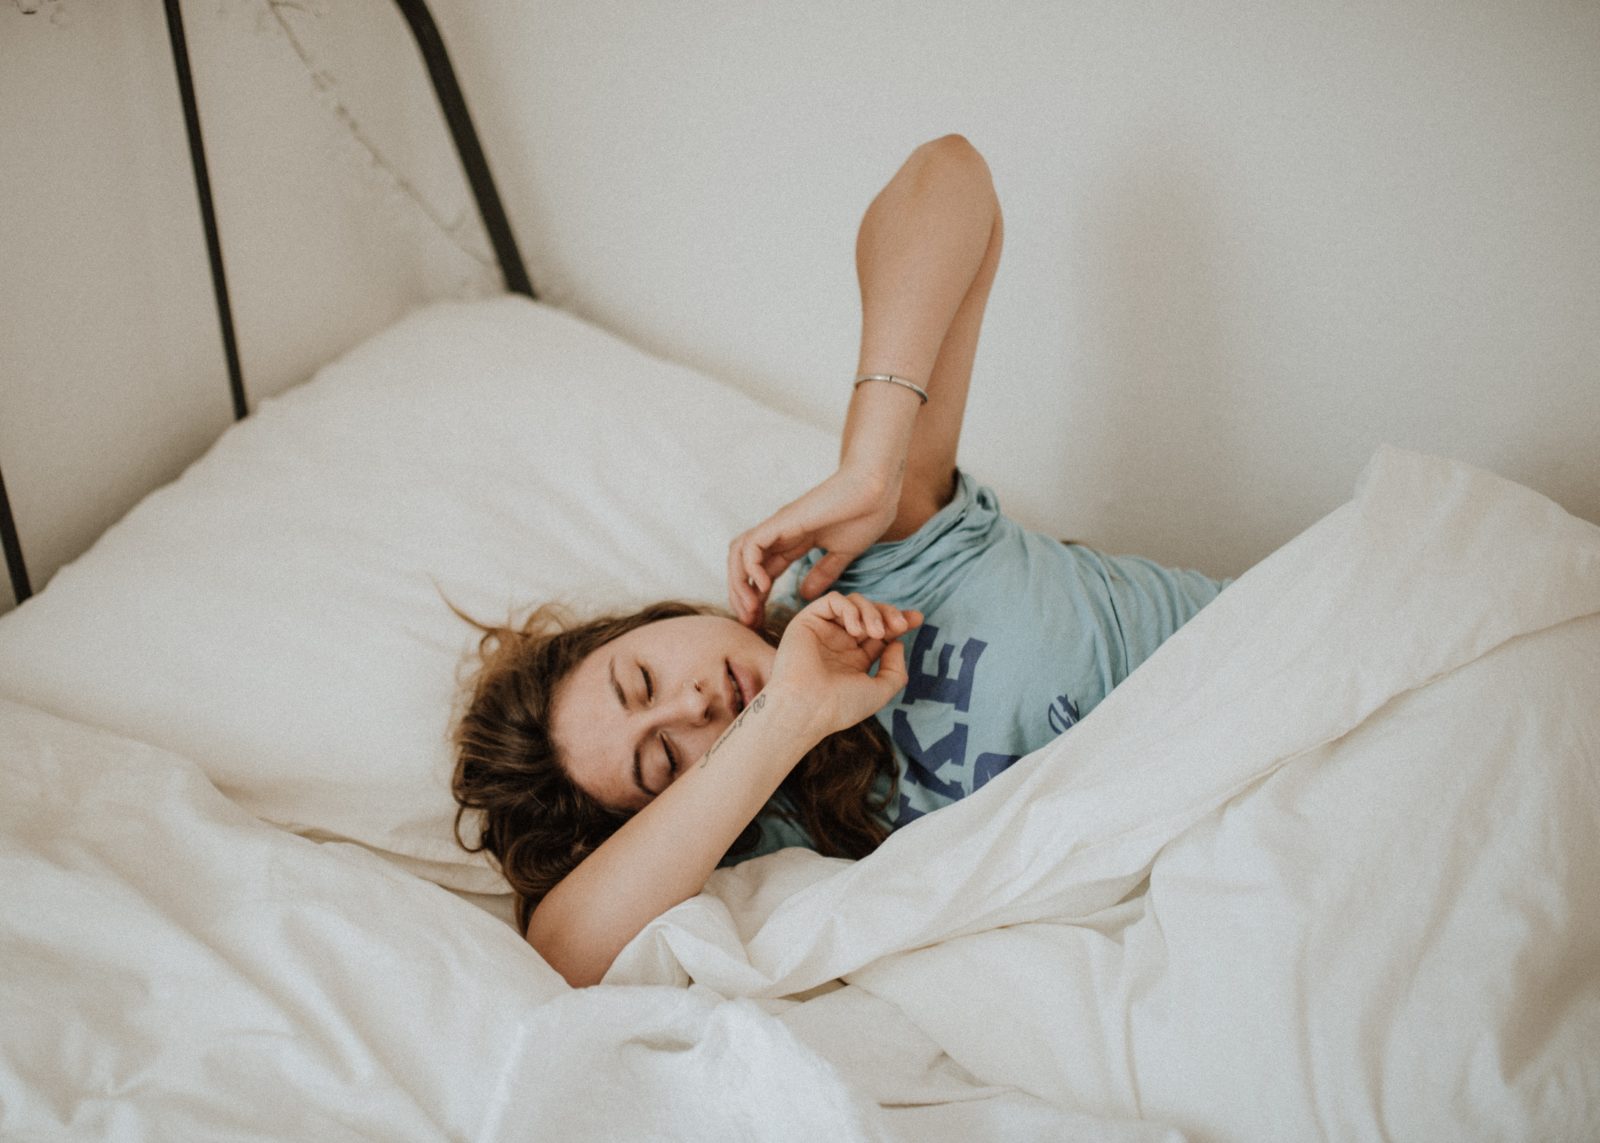 What causes snoring in females?